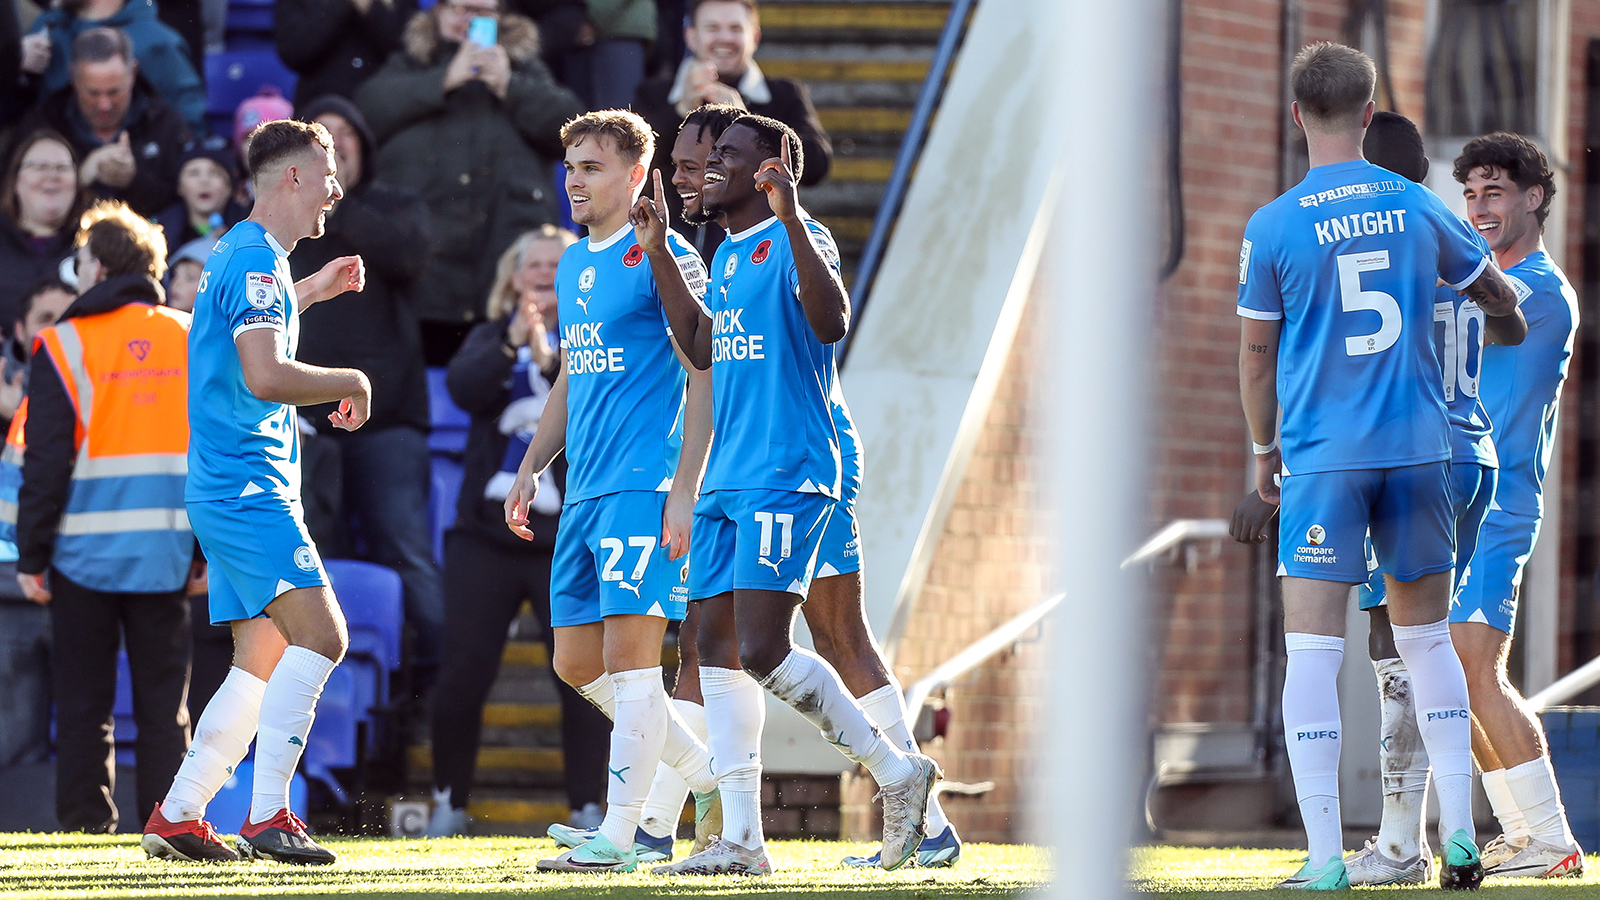 Posh players celebrate during the 5-0 win over Cambridge